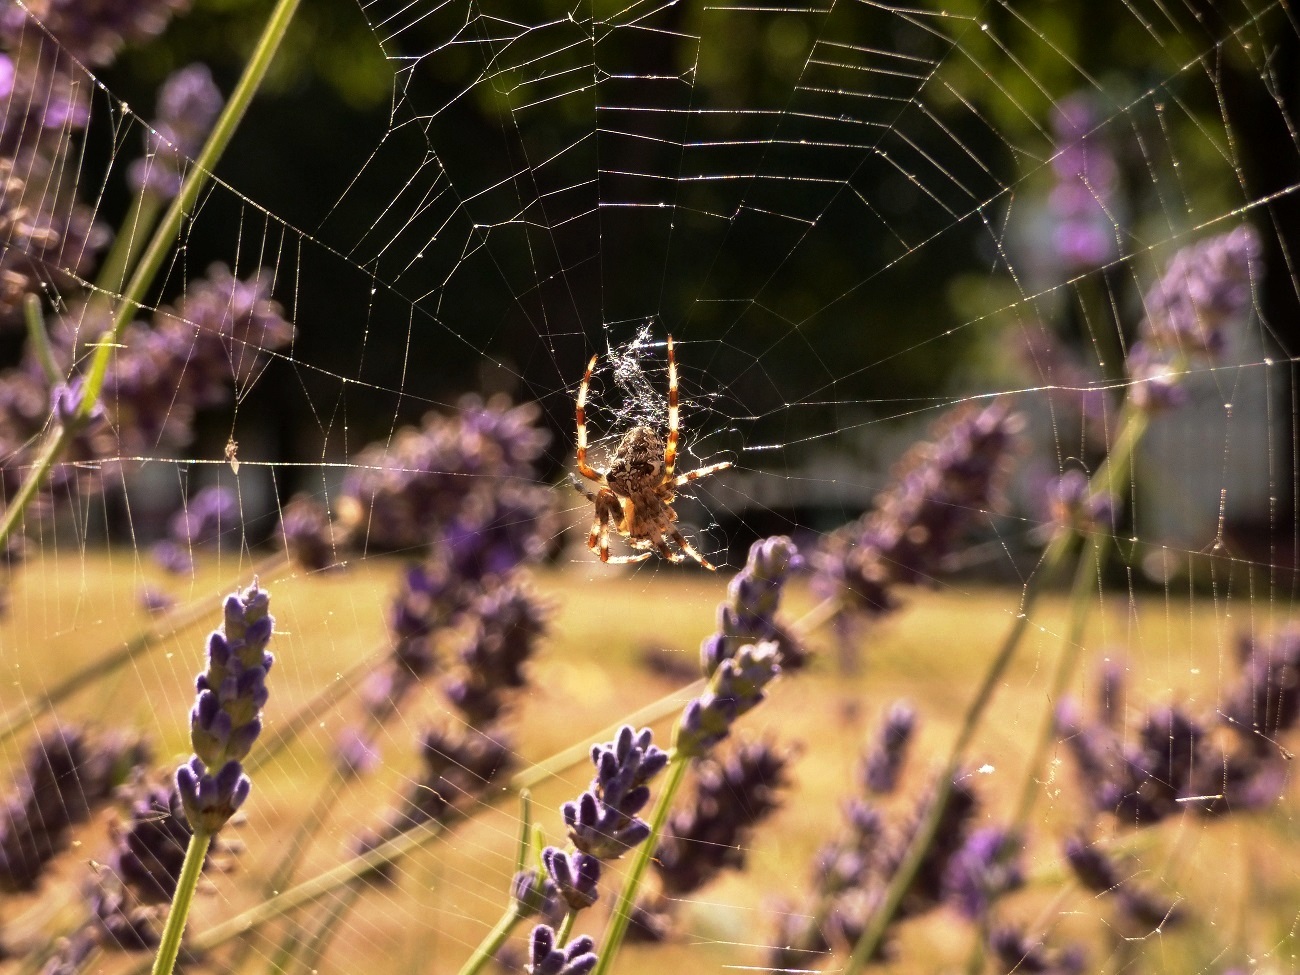 20160817_Tower-Hamlets_St-Dunstan-and-All-Saints-Church_Spider-enjoying-some-Lavender